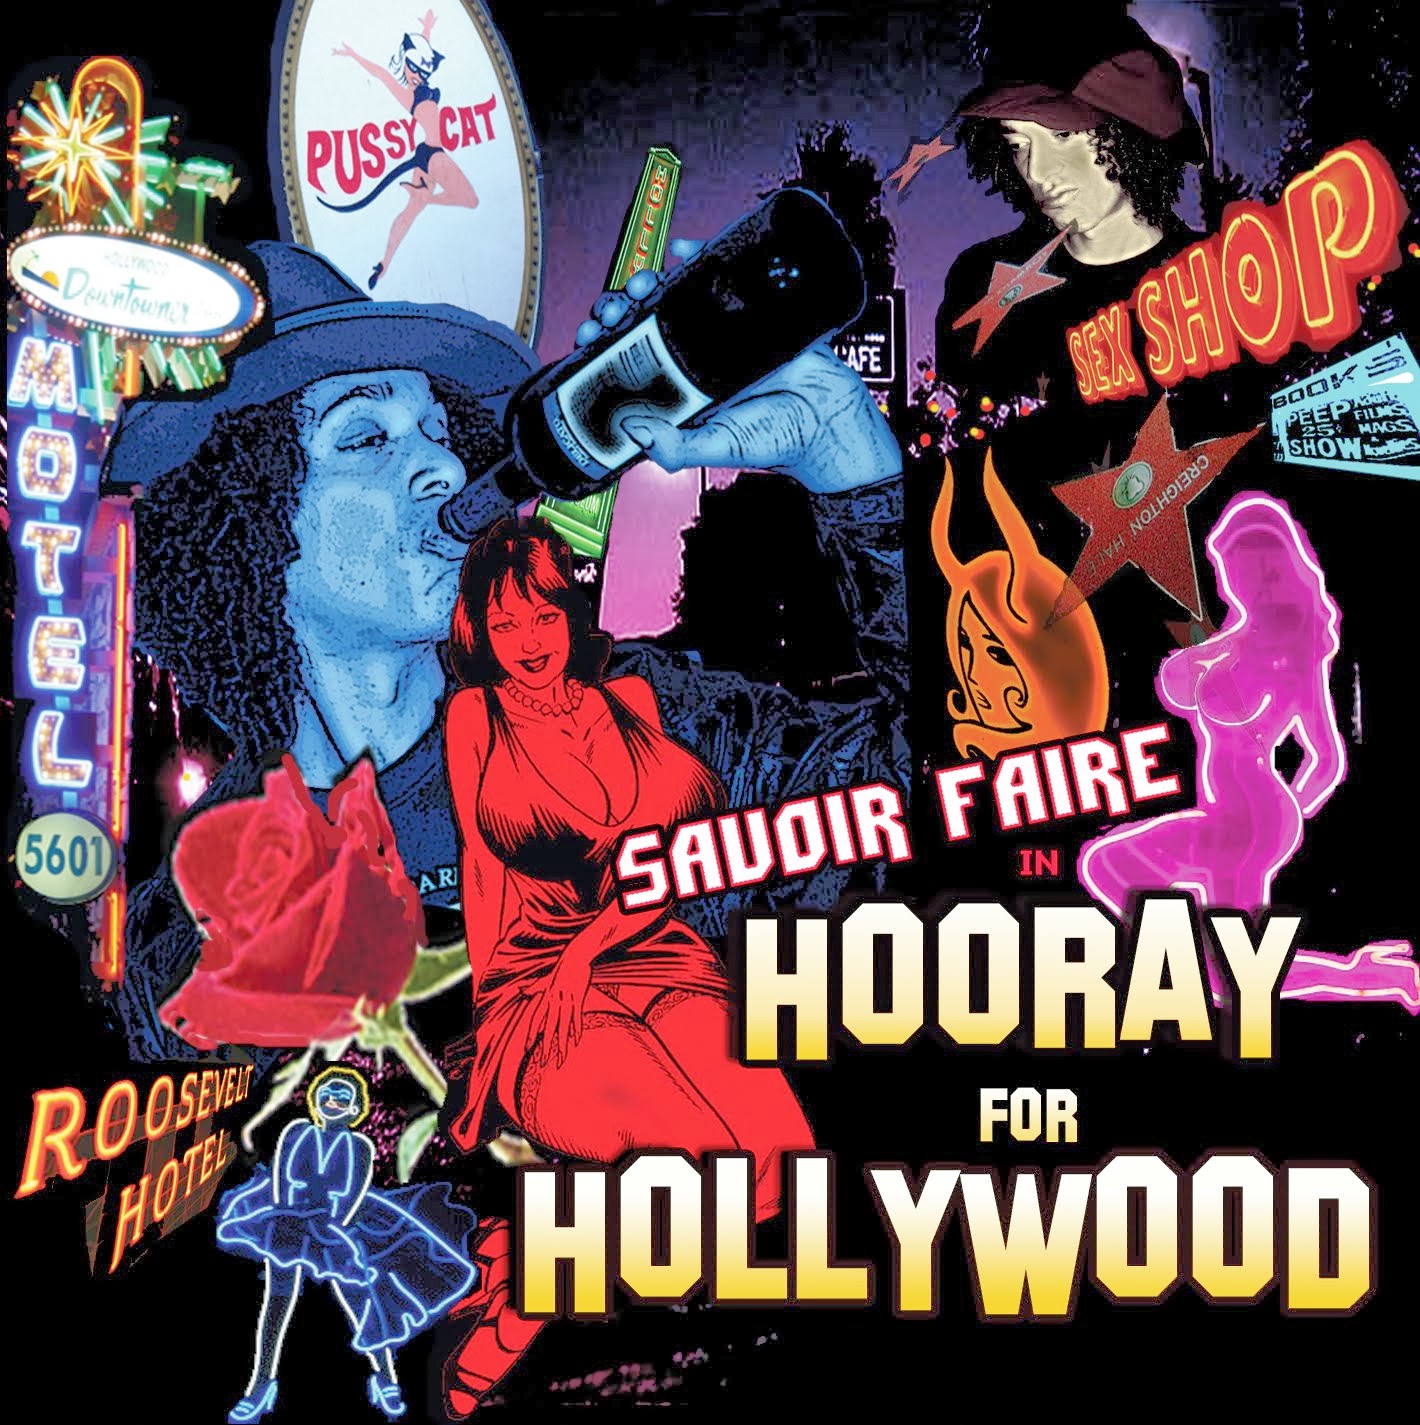 PURCHASE "HOORAY FOR HOLLYWOOD" LP FROM AMOEBA RECORDS IN HOLLYWOOD!!!